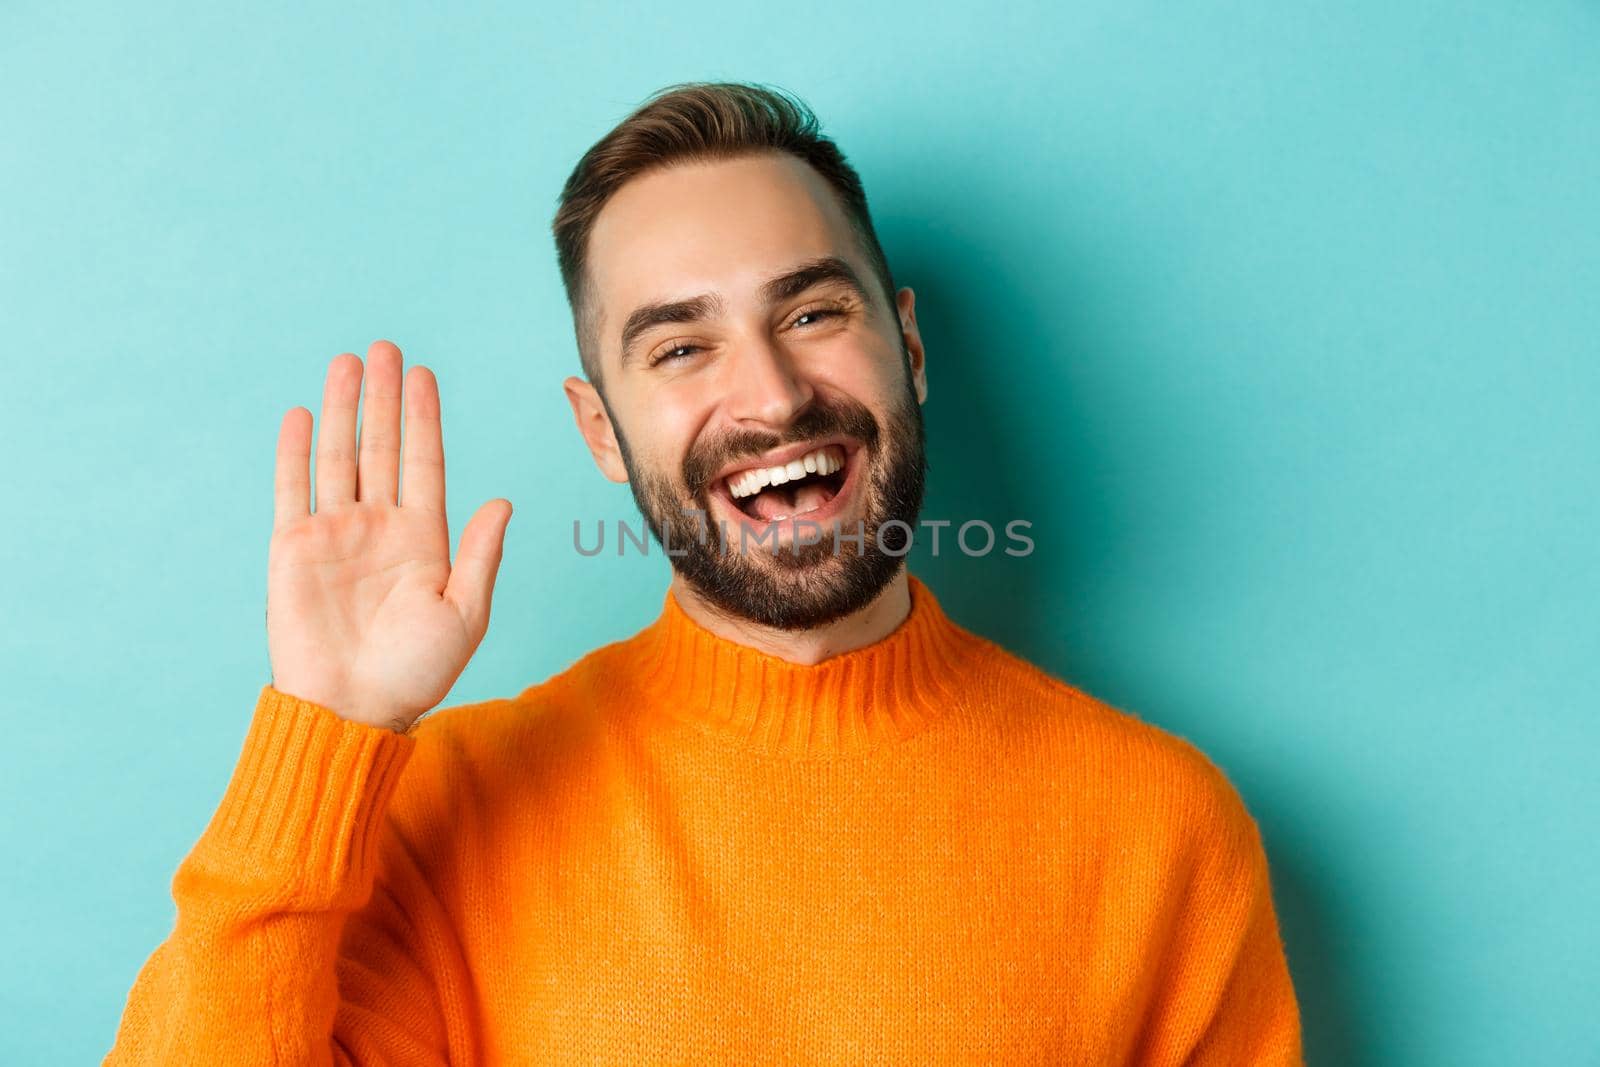 Close-up of friendly young man smiling, waving hand to say hello, greeting you, standing over light blue background.